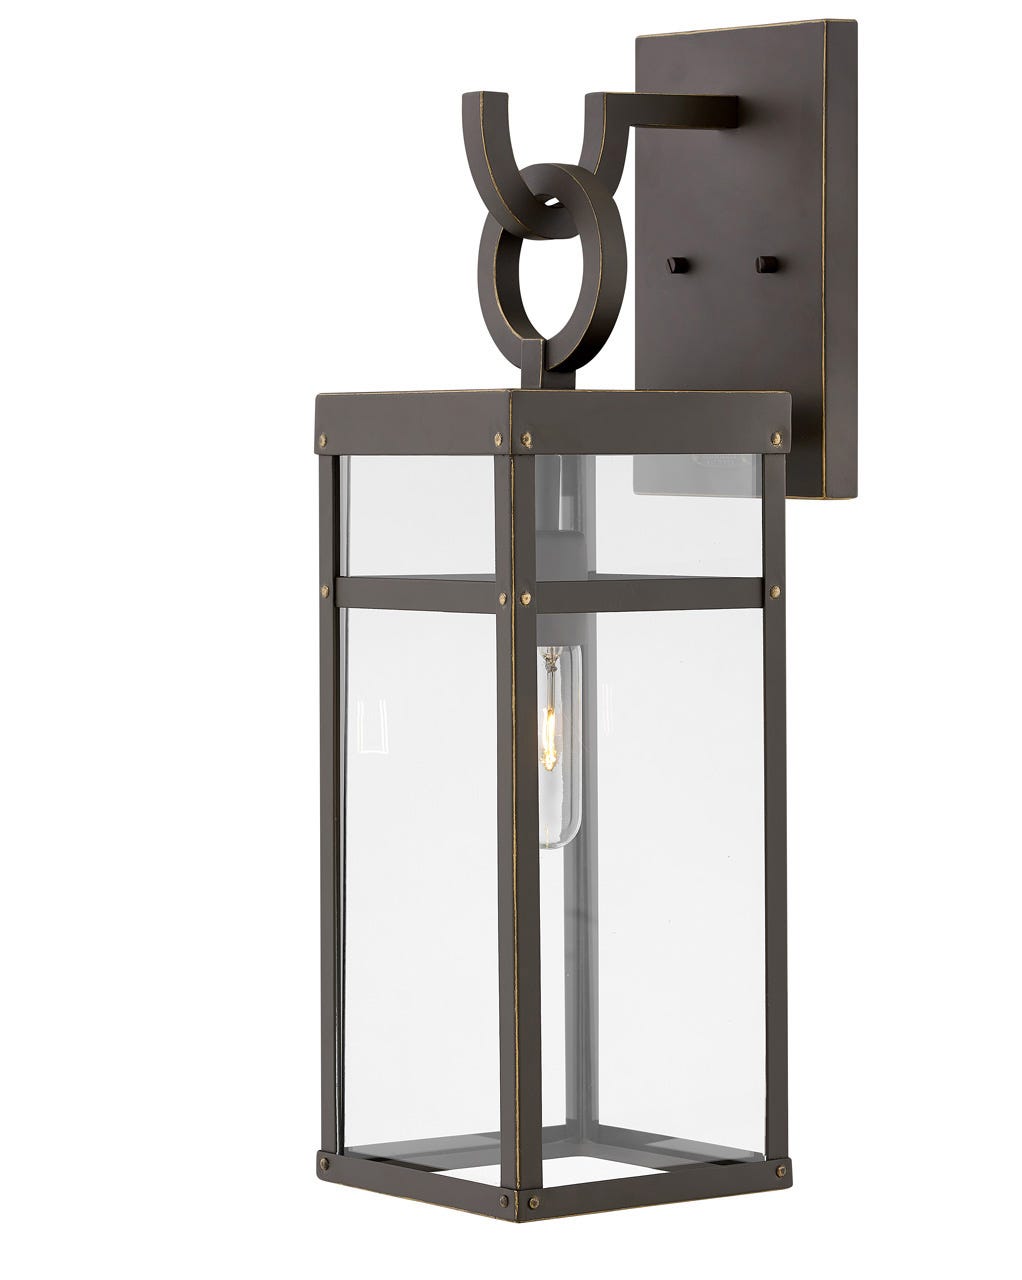 OUTDOOR PORTER Wall Mount Lantern Outdoor l Wall Hinkley Oil Rubbed Bronze 8.25x6.5x22.0 